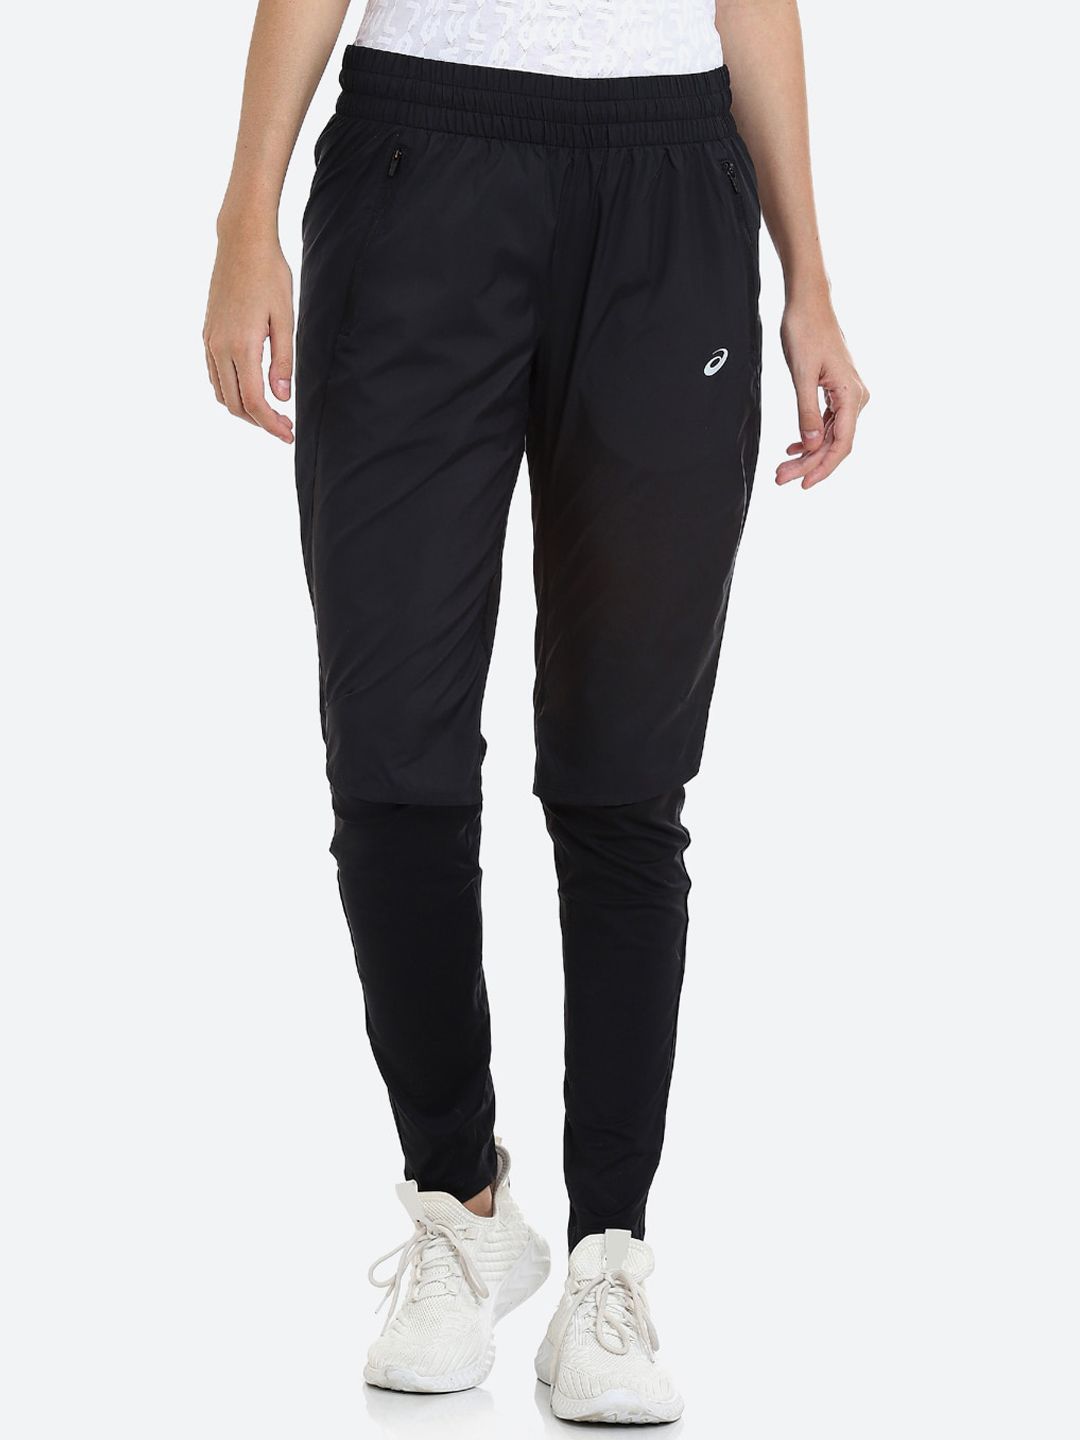 ASICS Women Black Solid Race Track Pants Price in India